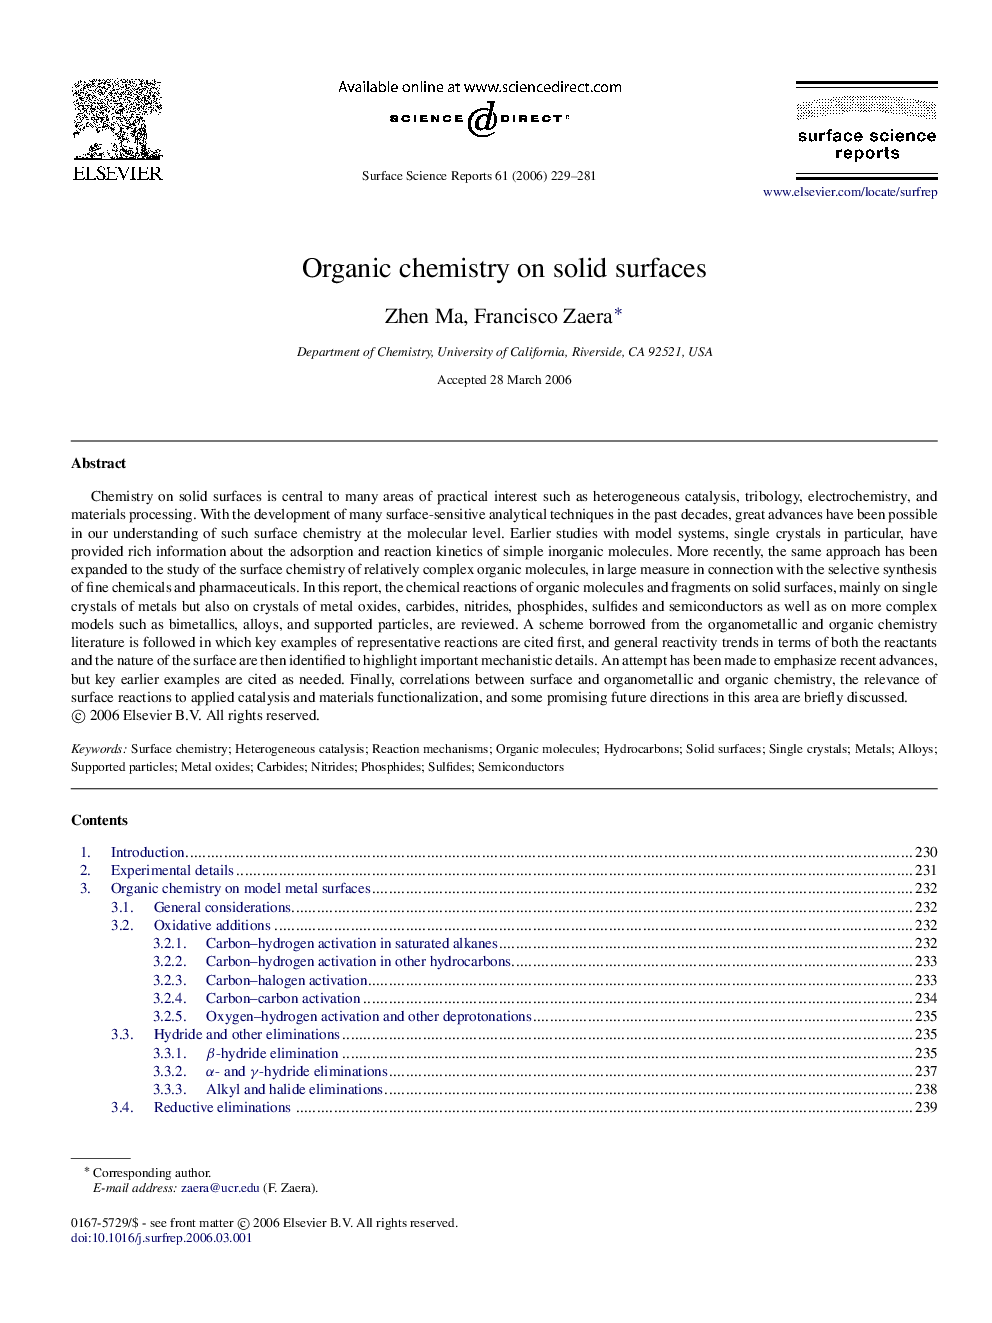 Organic chemistry on solid surfaces